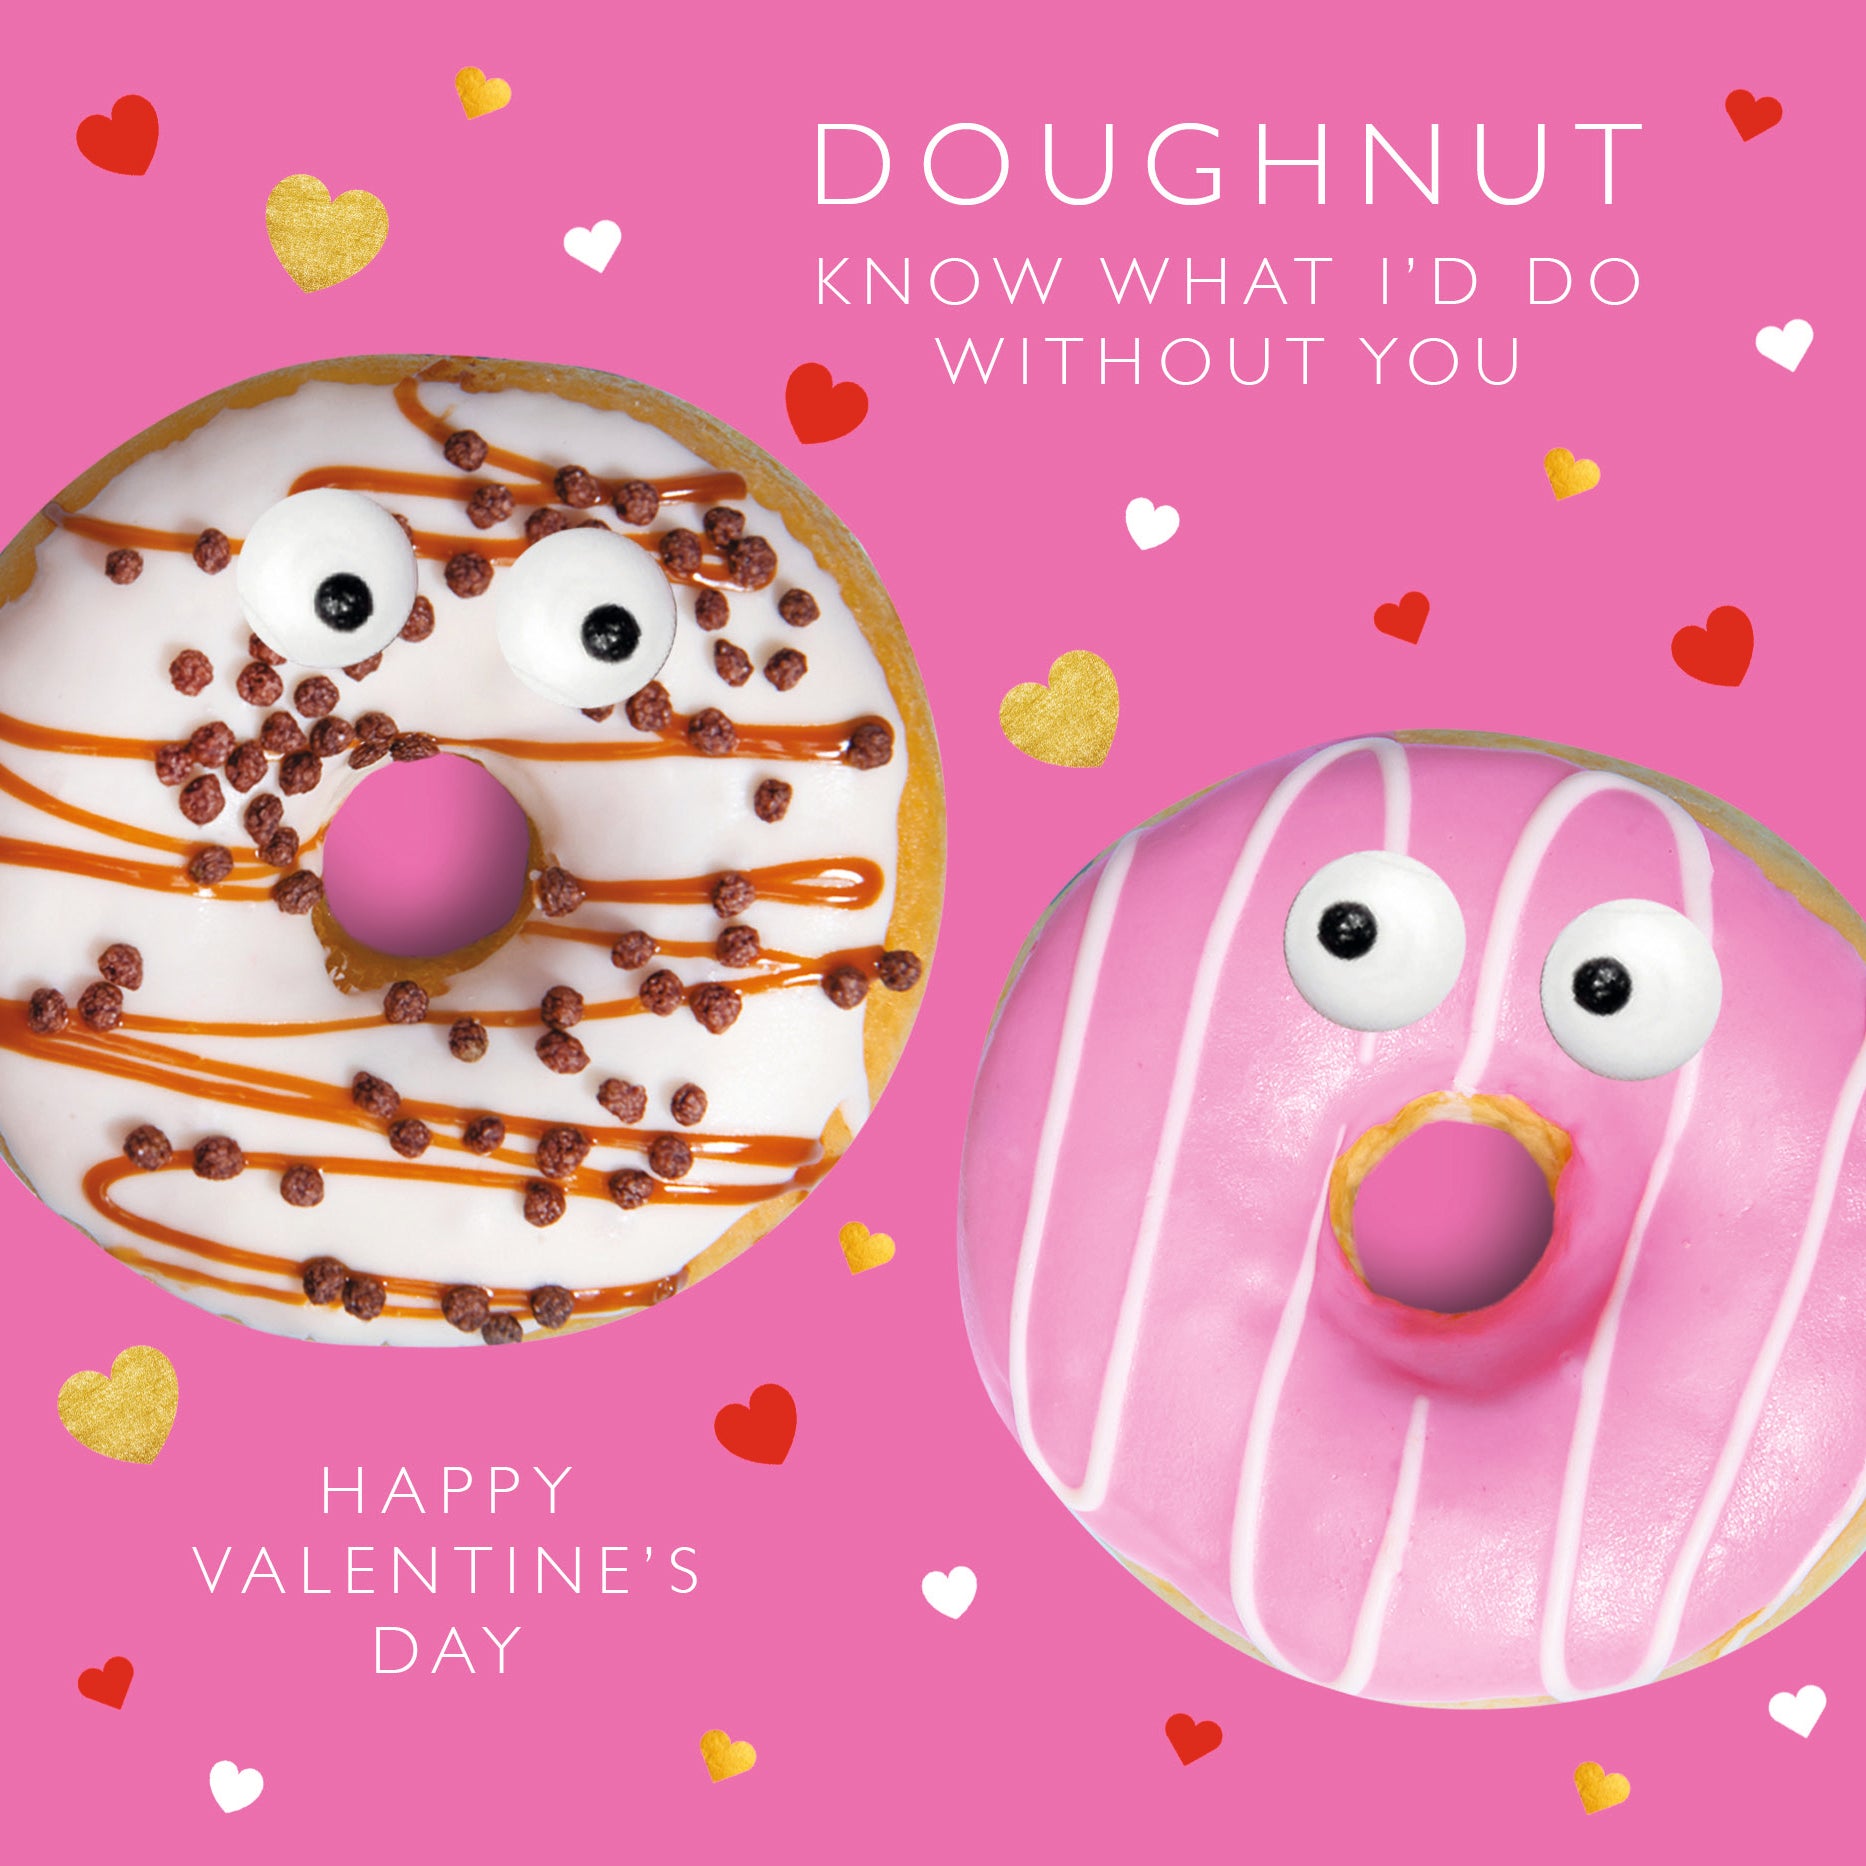 Doughnut Know What I'd Do Valentine Card by penny black